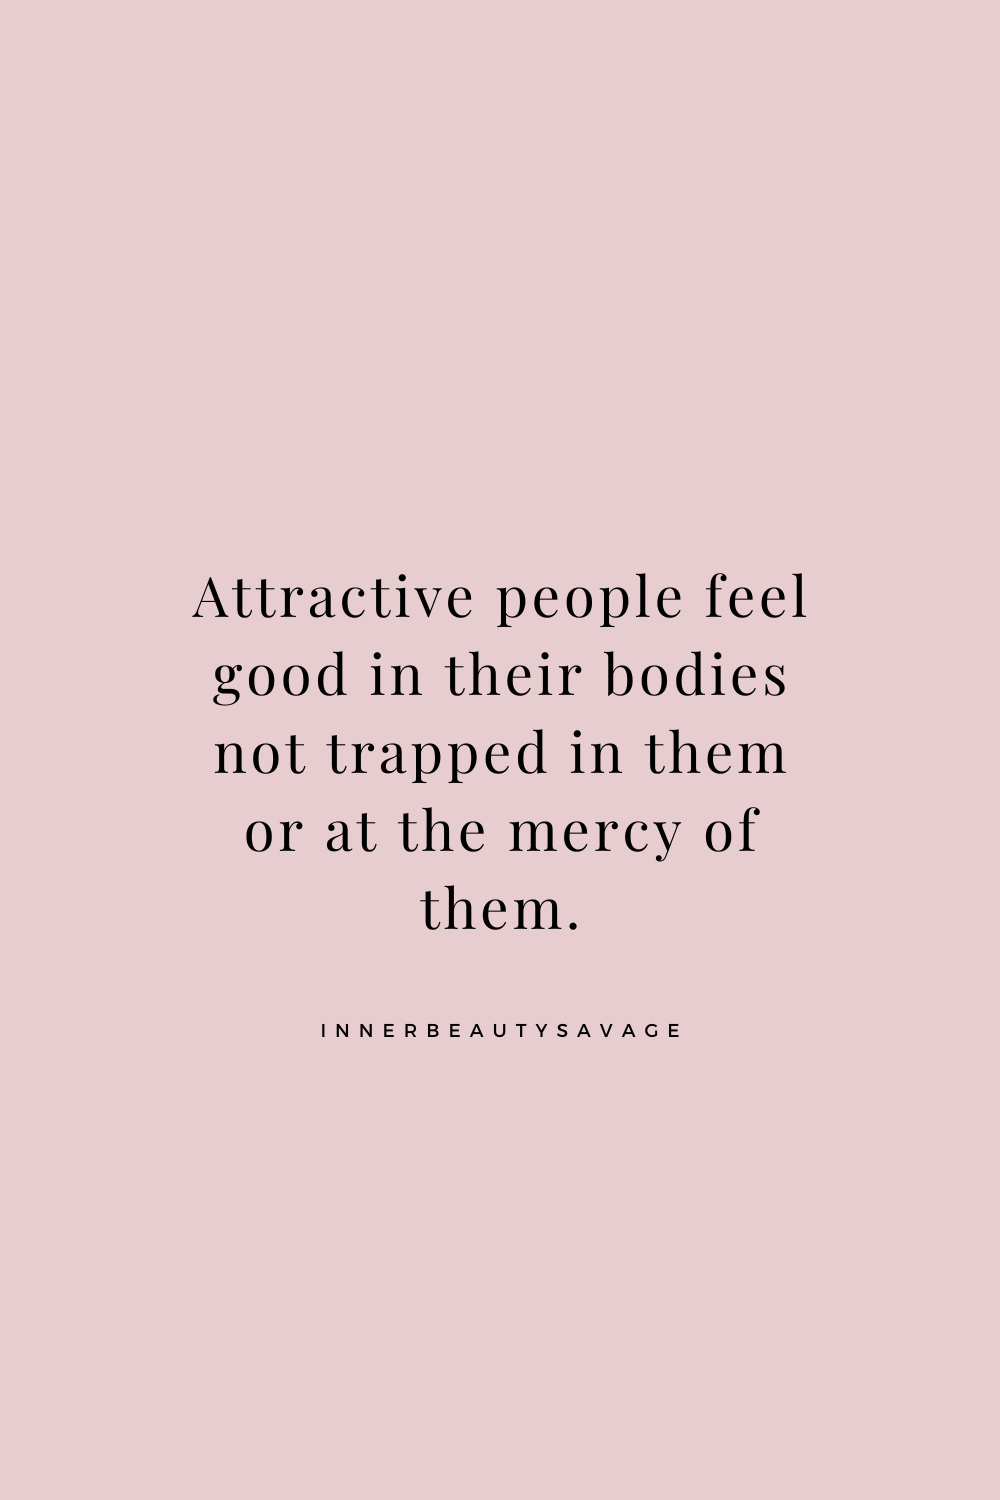 quote on attractive people